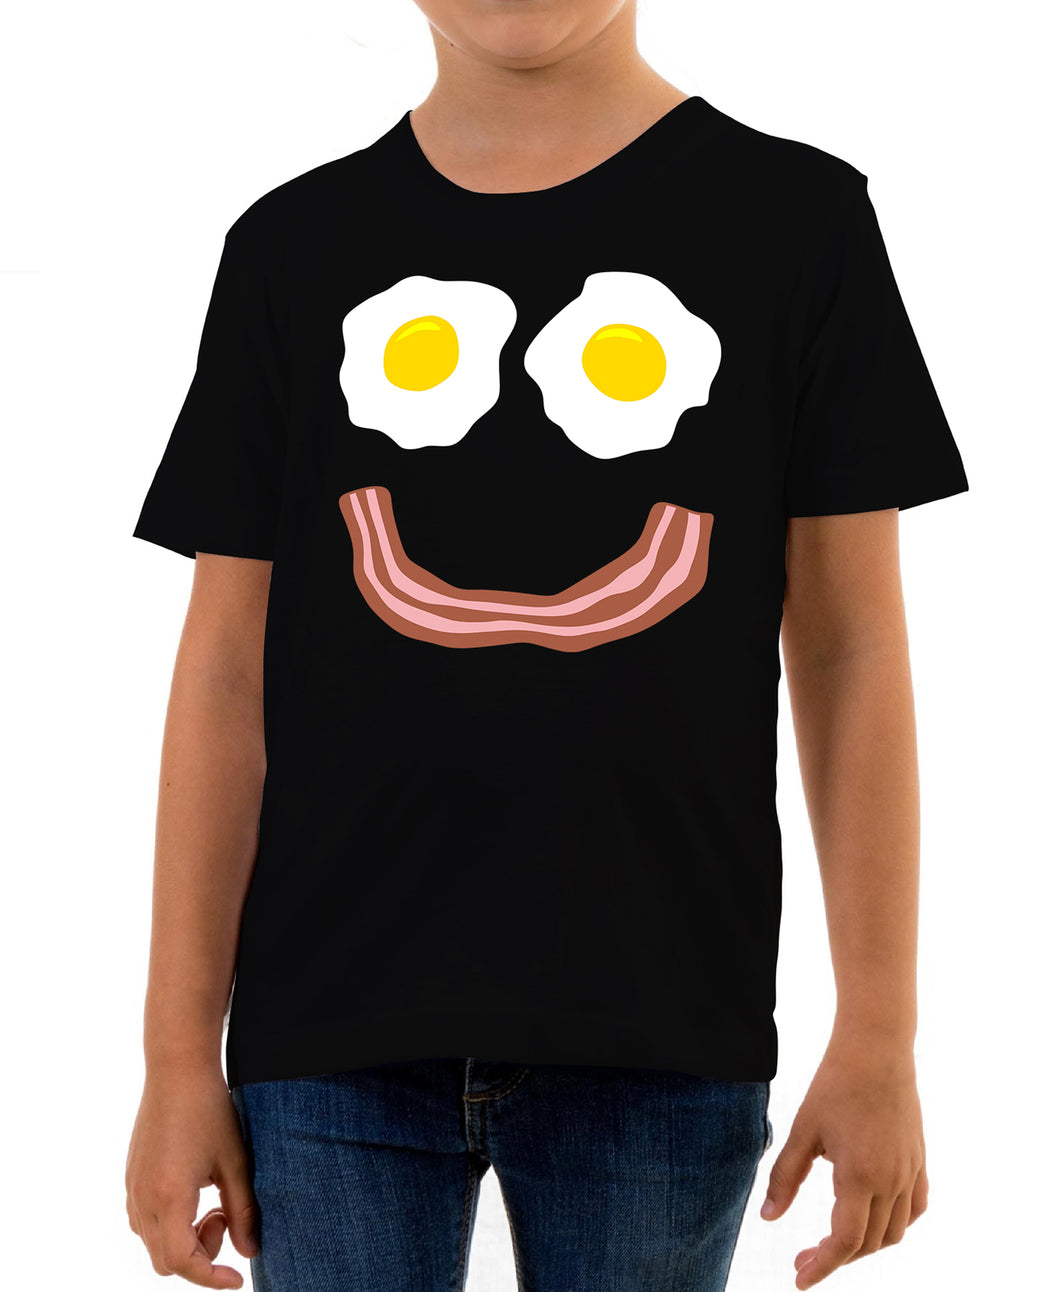 Reality Glitch Bacon and Eggs Smile Kids T-Shirt